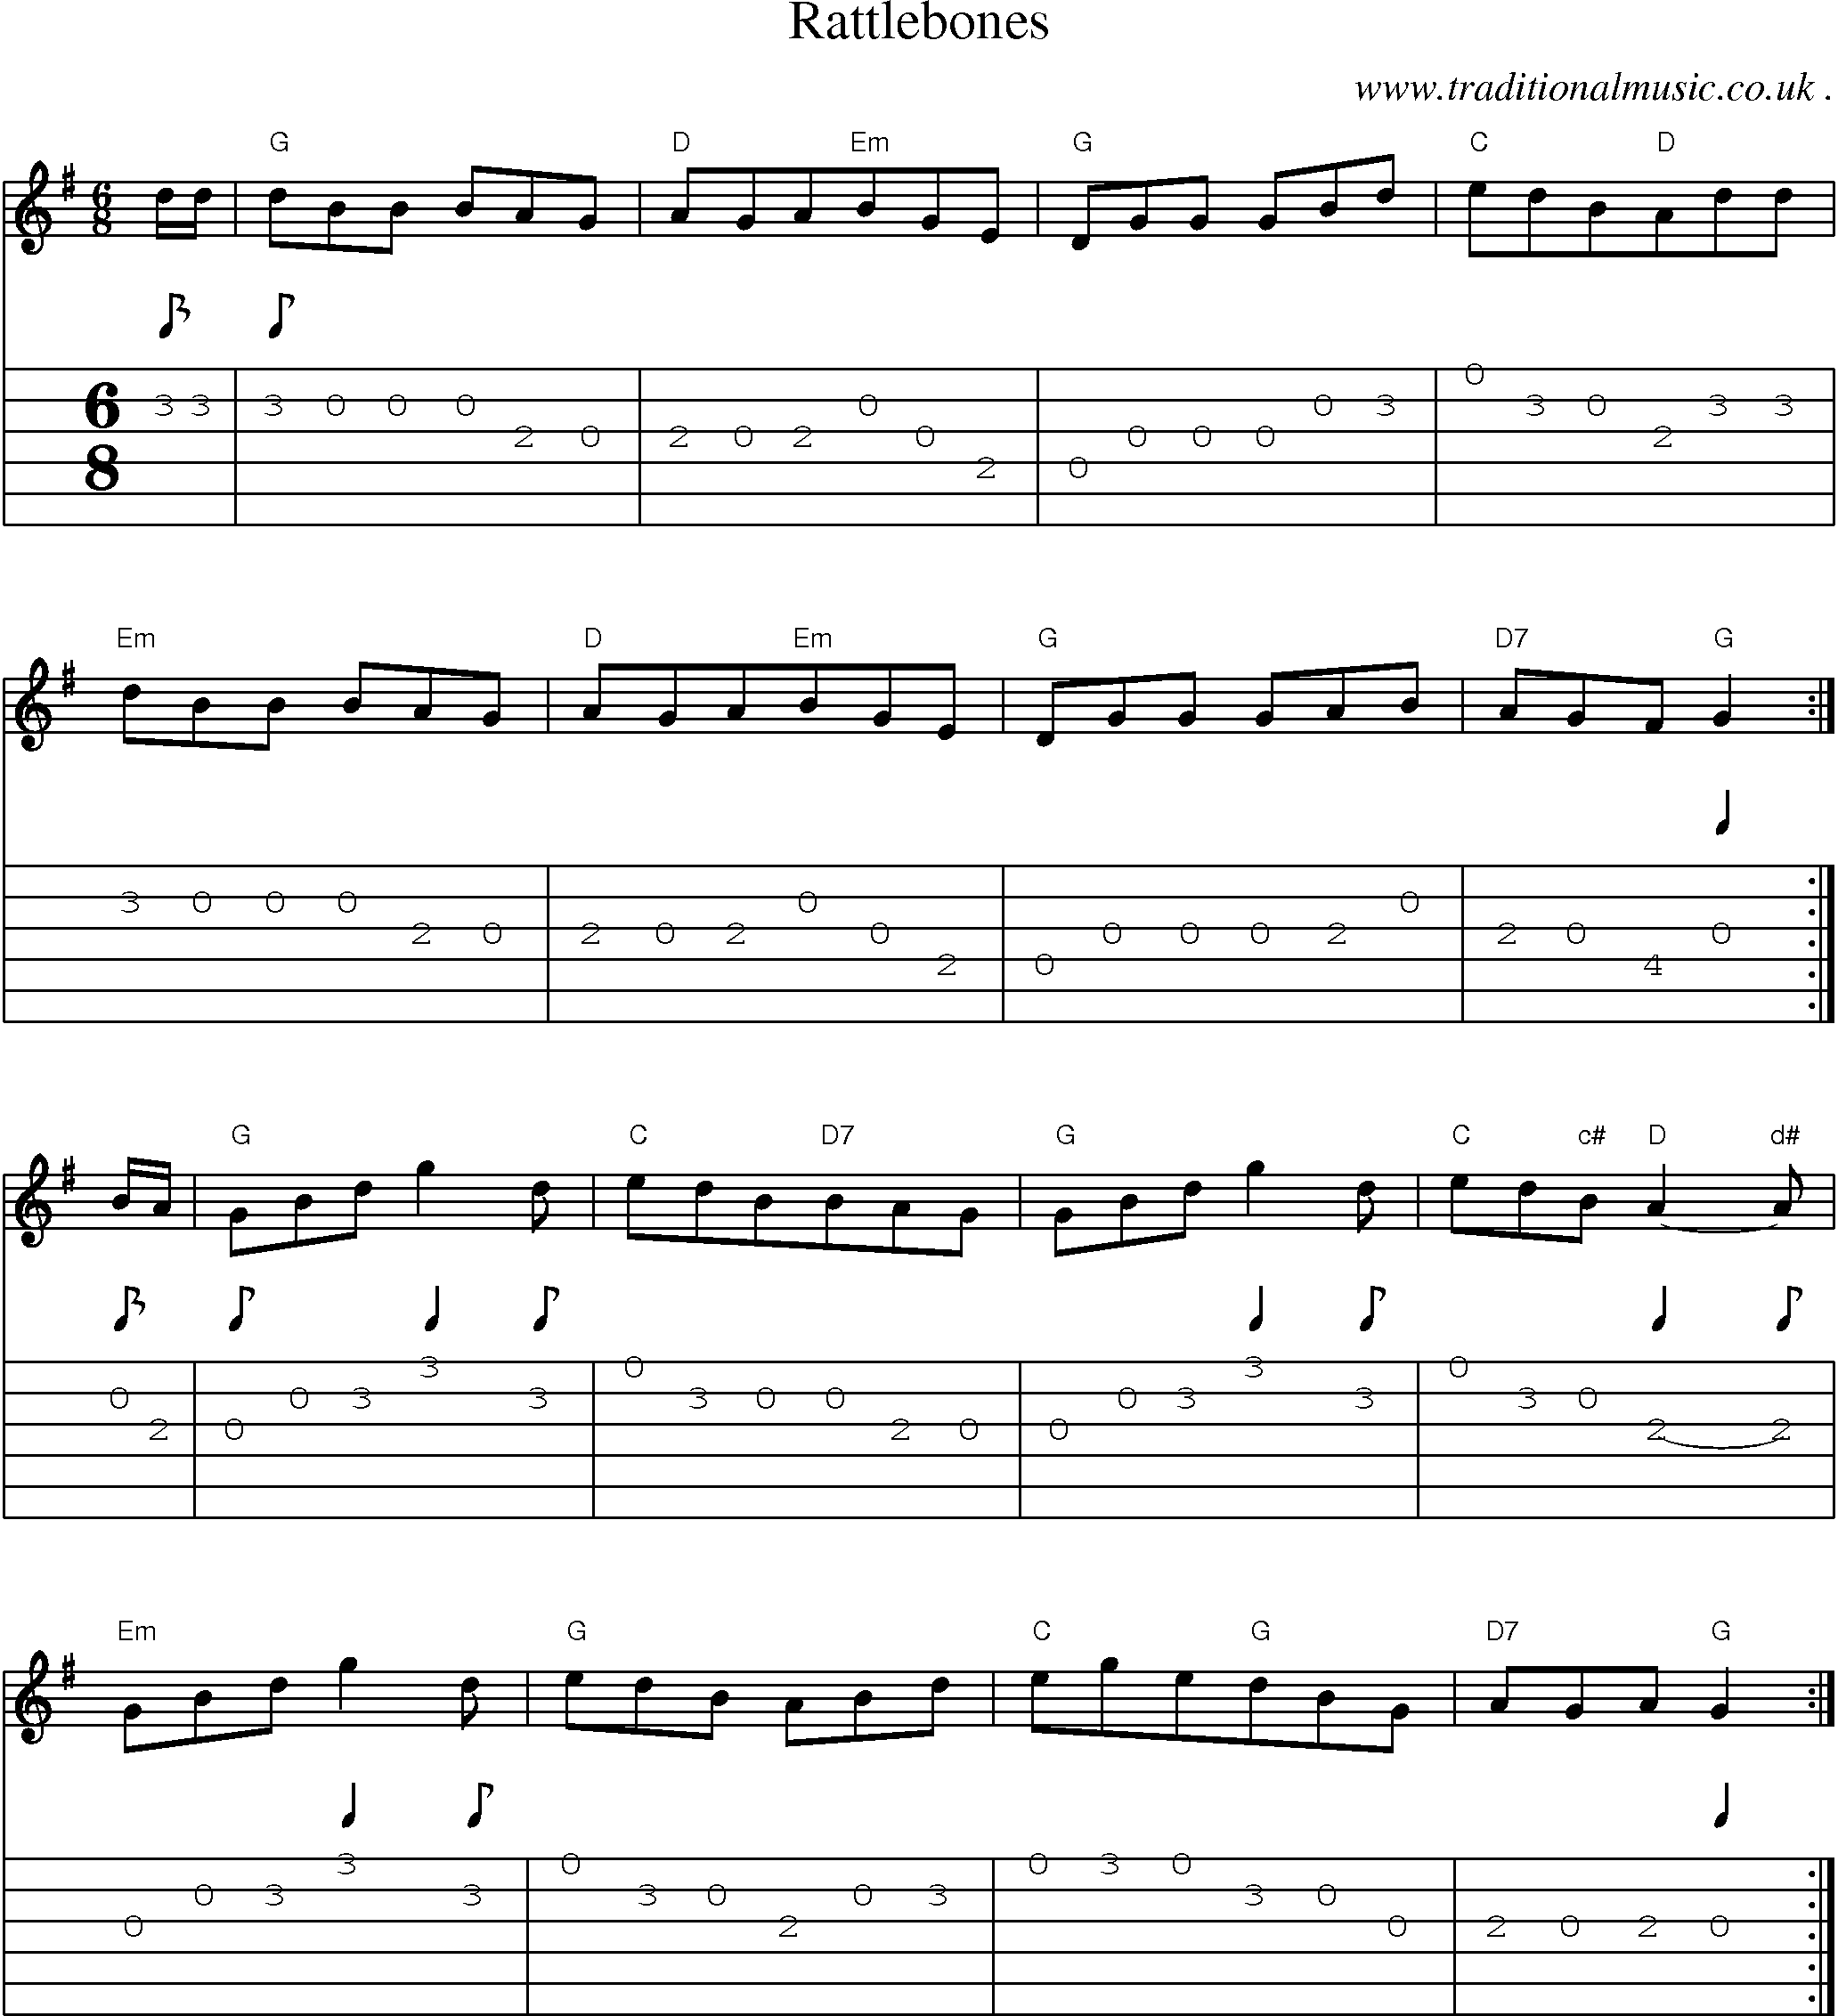 Sheet-Music and Guitar Tabs for Rattlebones